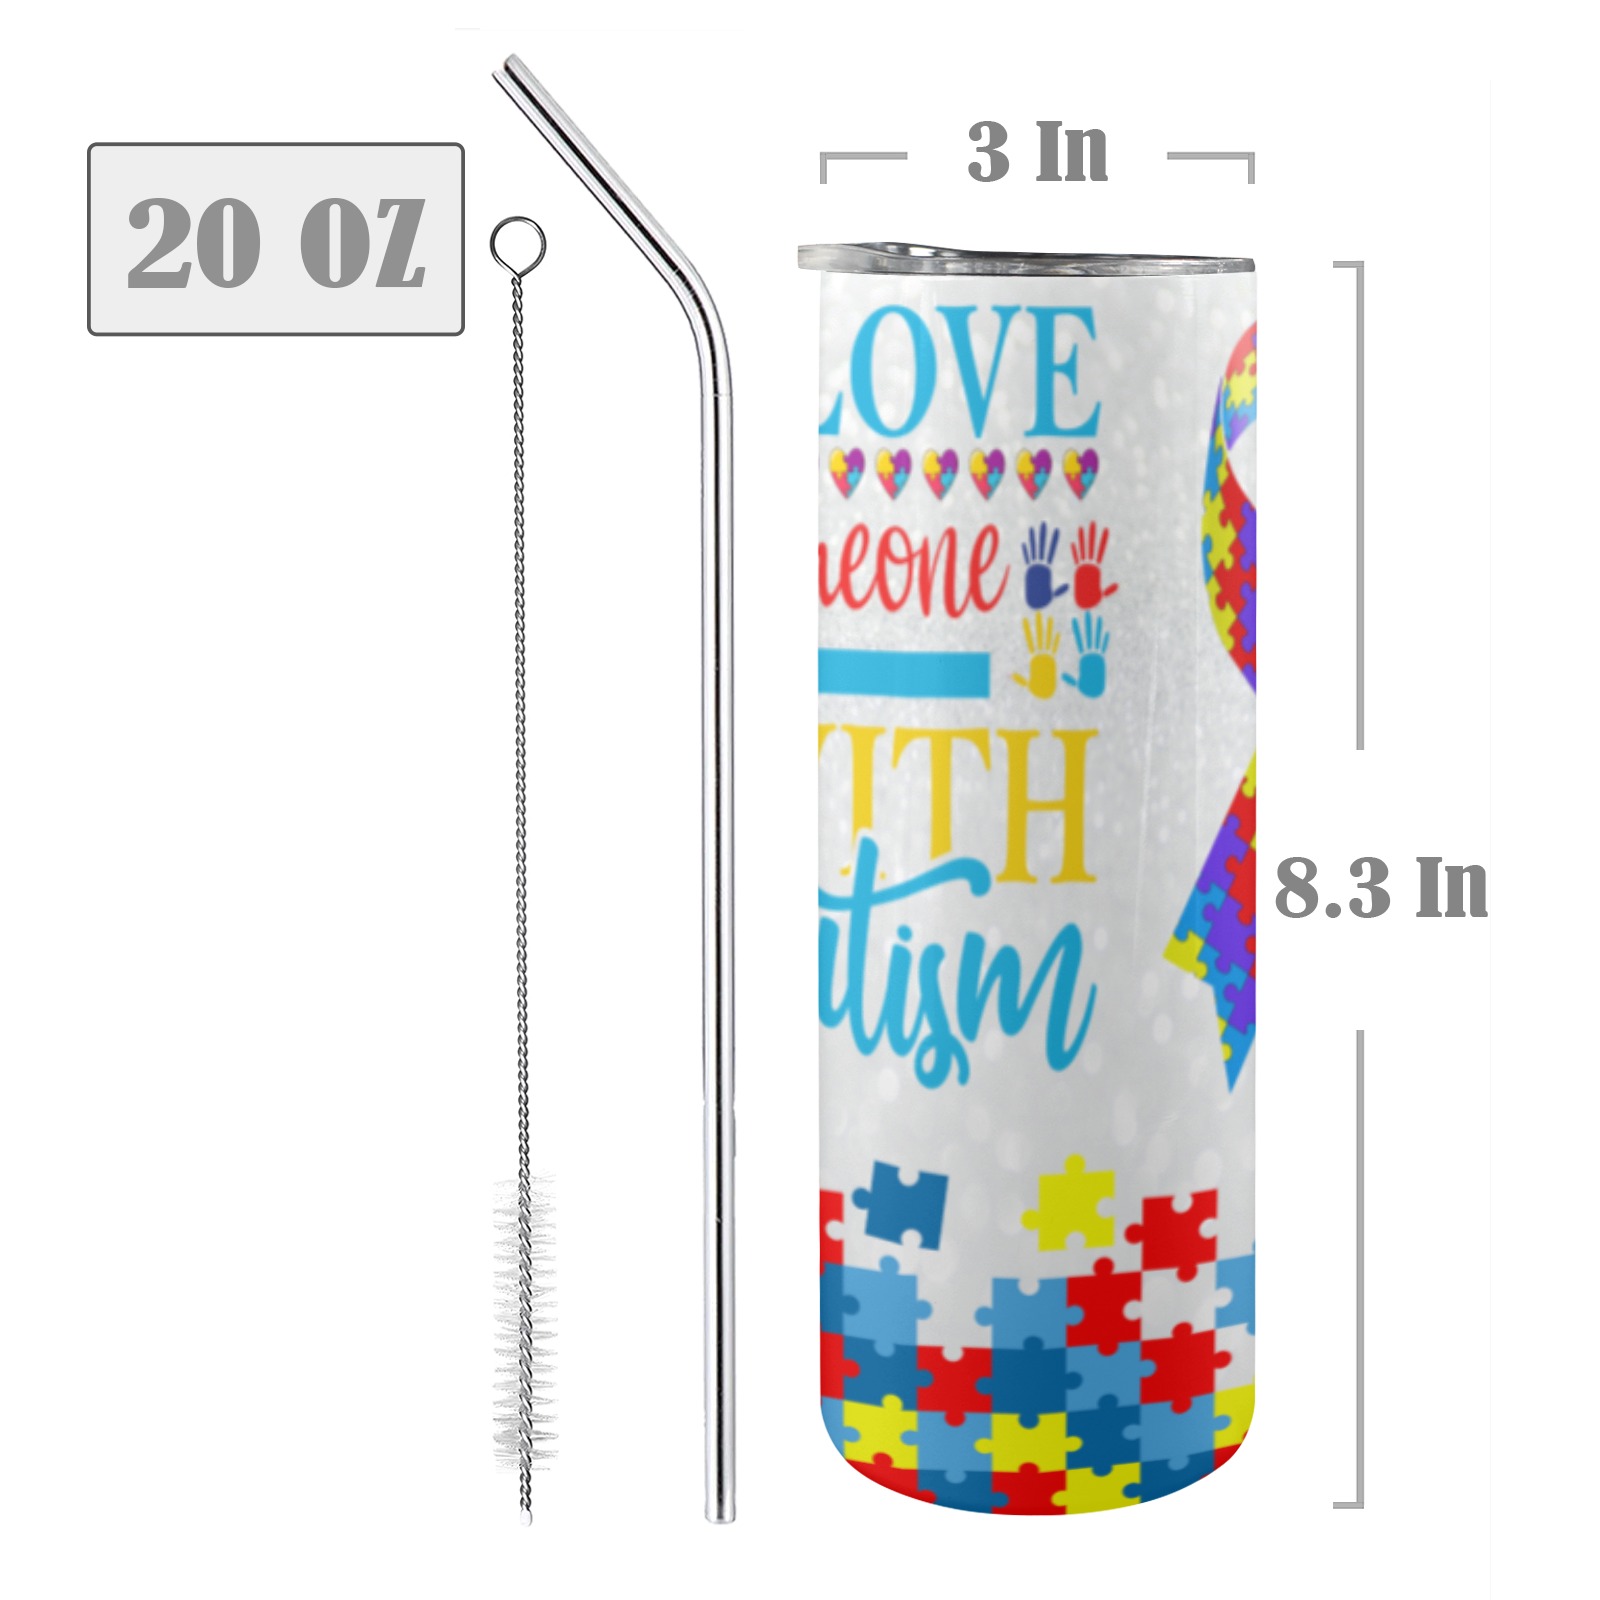 I Love Someone With Autism Skinny 20oz Tumbler 20oz Tall Skinny Tumbler with Lid and Straw